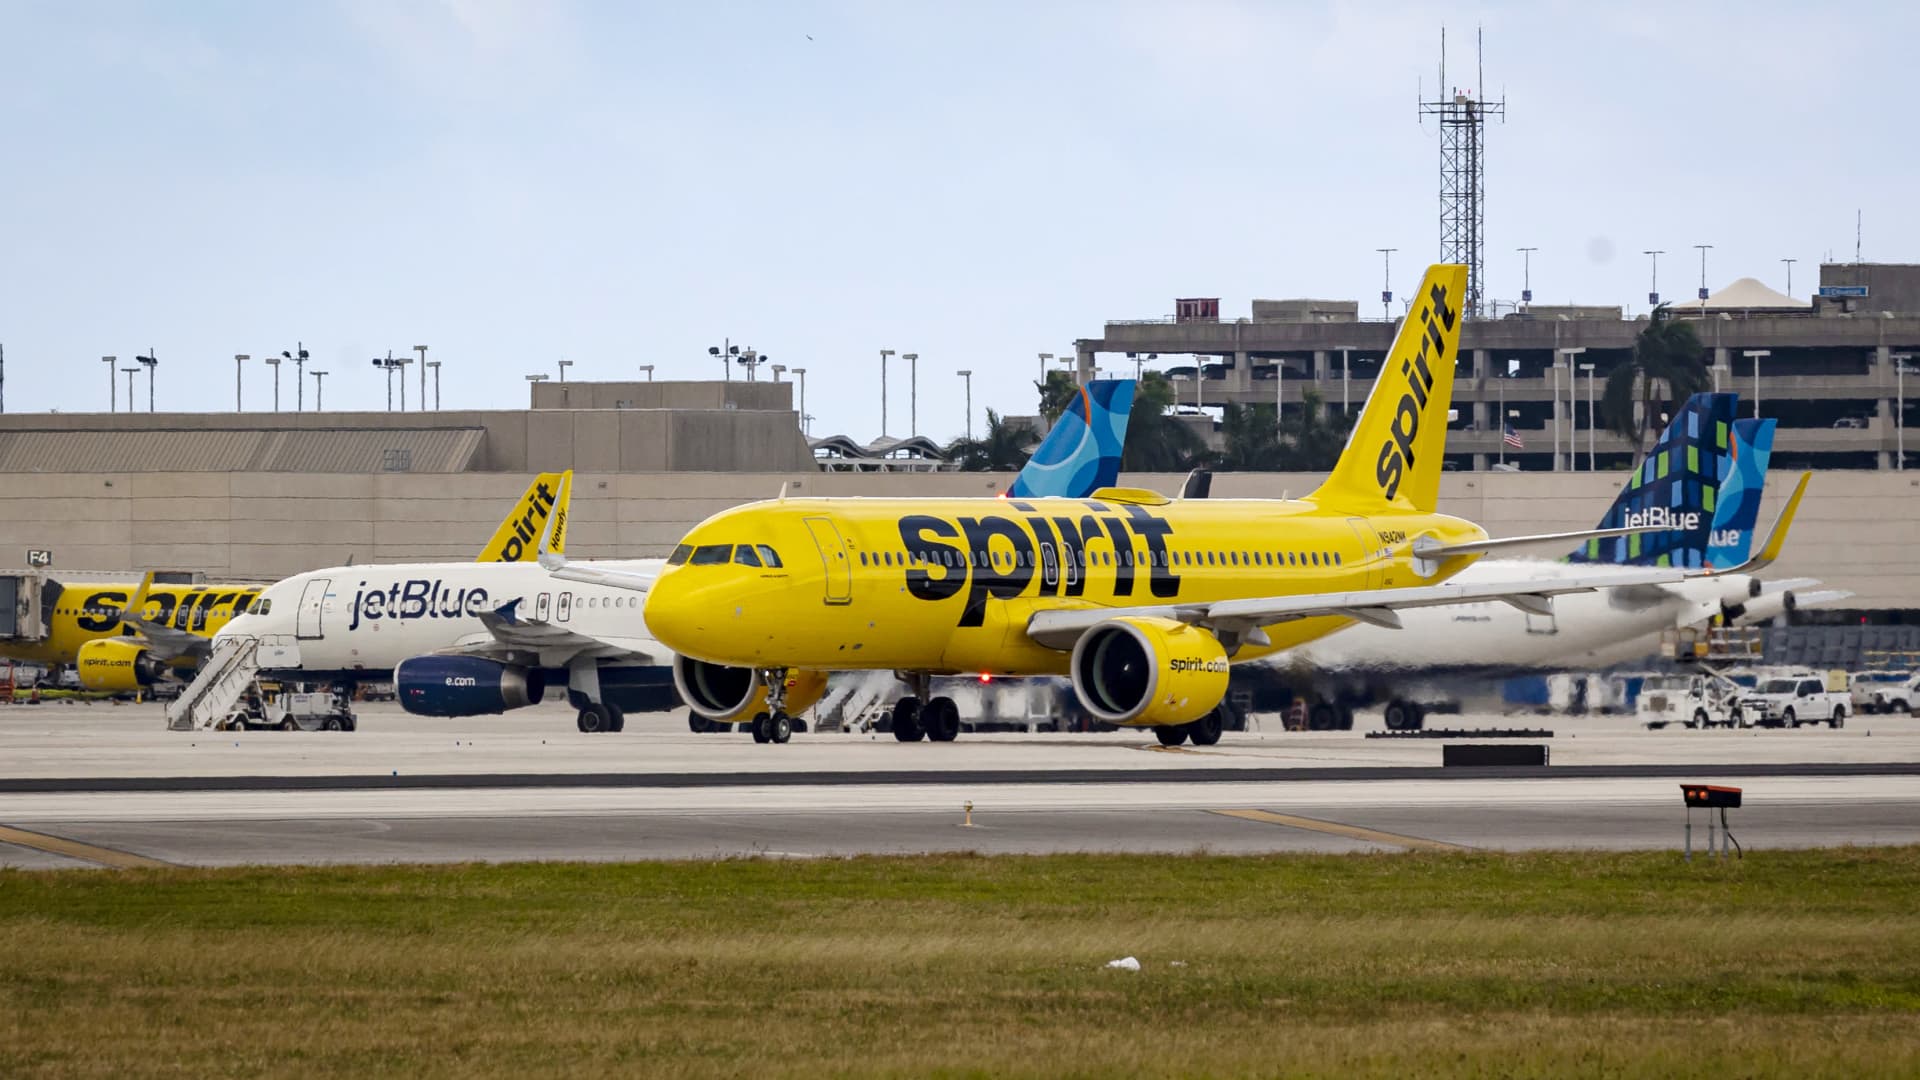 Spirit Airlines stock rebounds after appeal of JetBlue merger block